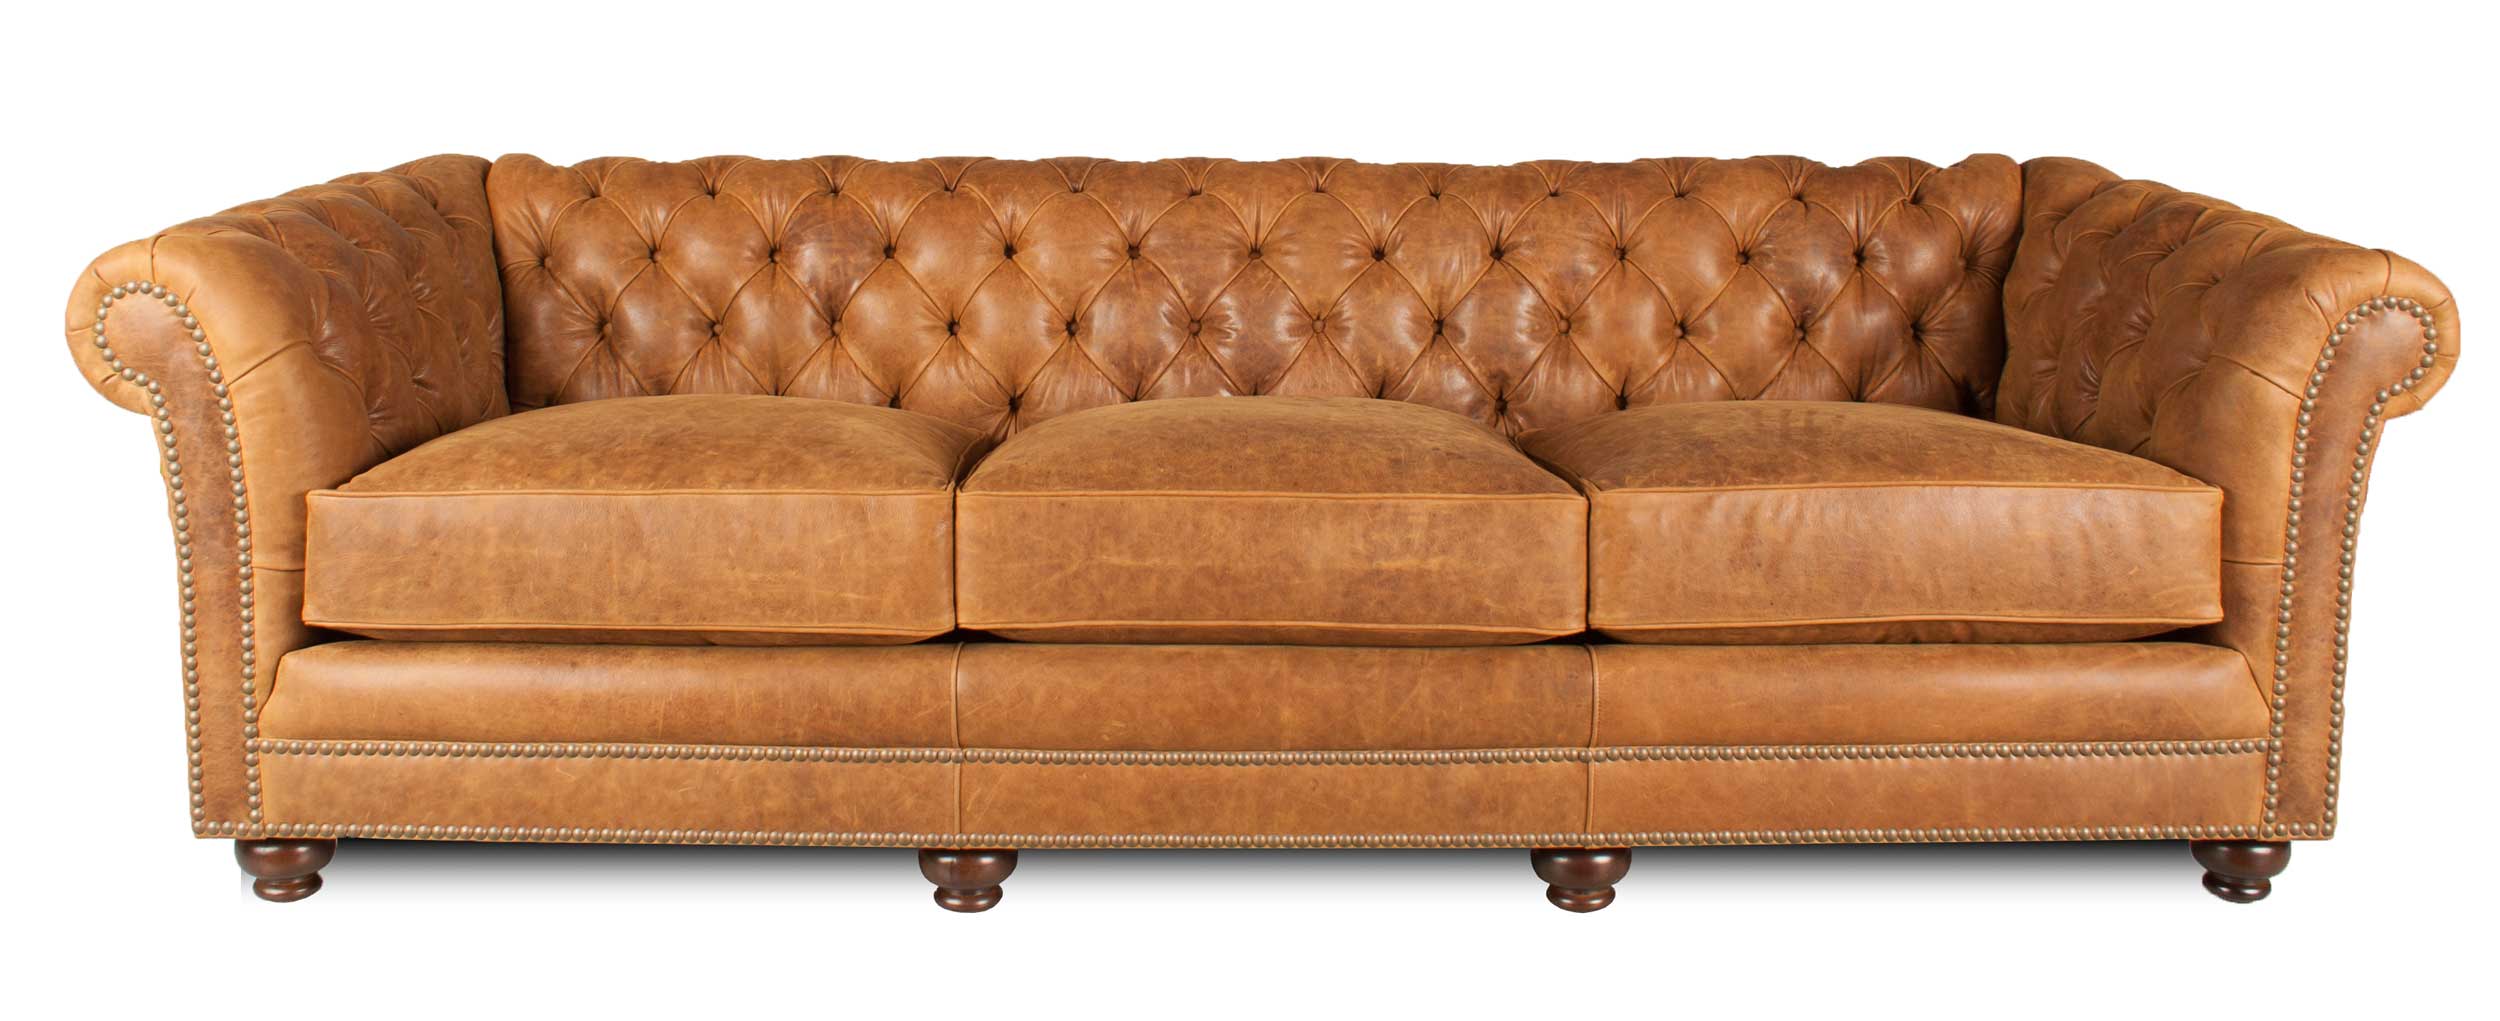 Deep Seated Sofas For The Big And Tall, Extra Long Tufted Sofa